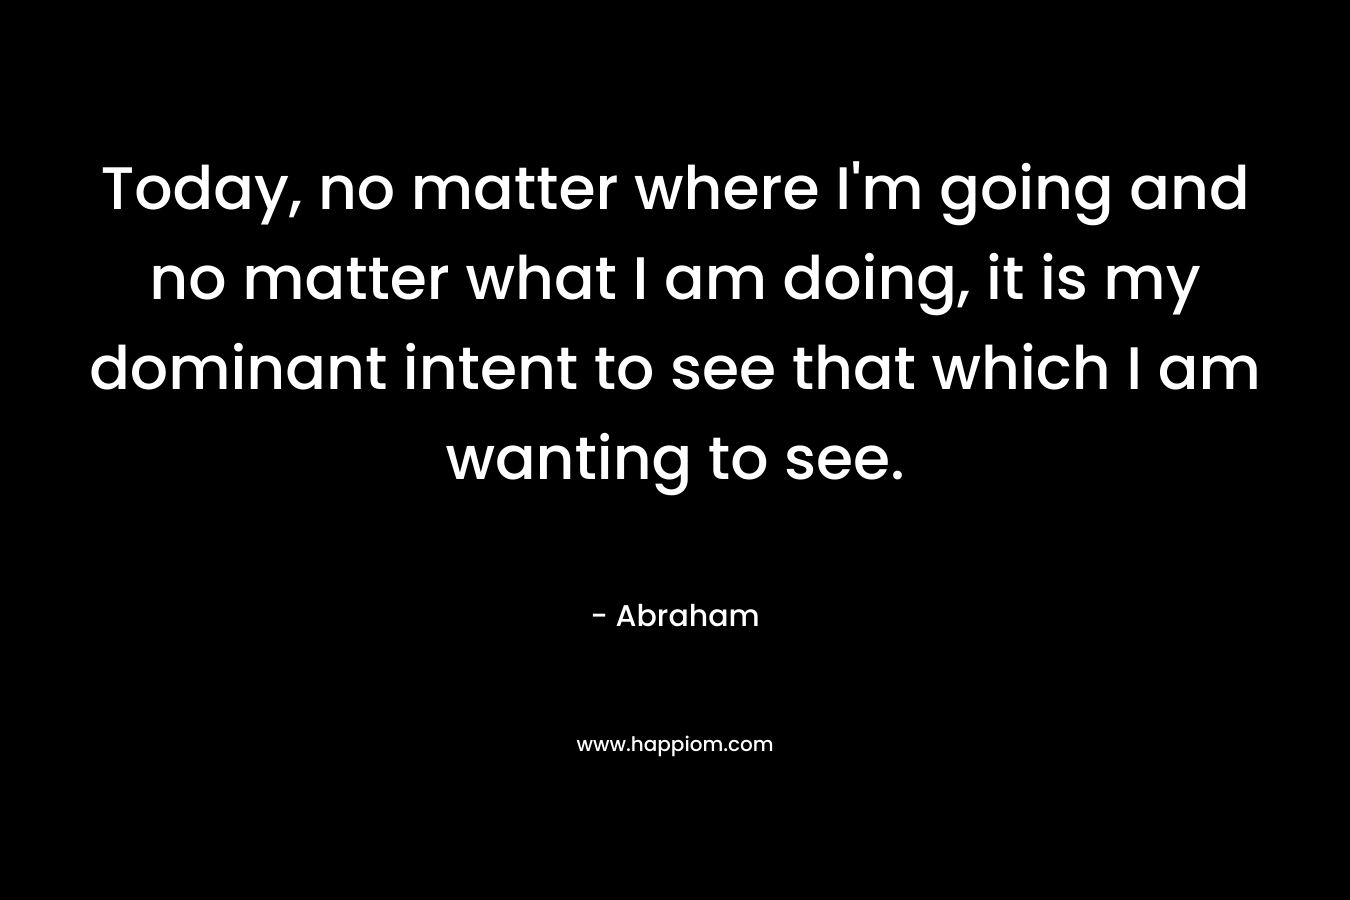 Today, no matter where I’m going and no matter what I am doing, it is my dominant intent to see that which I am wanting to see. – Abraham